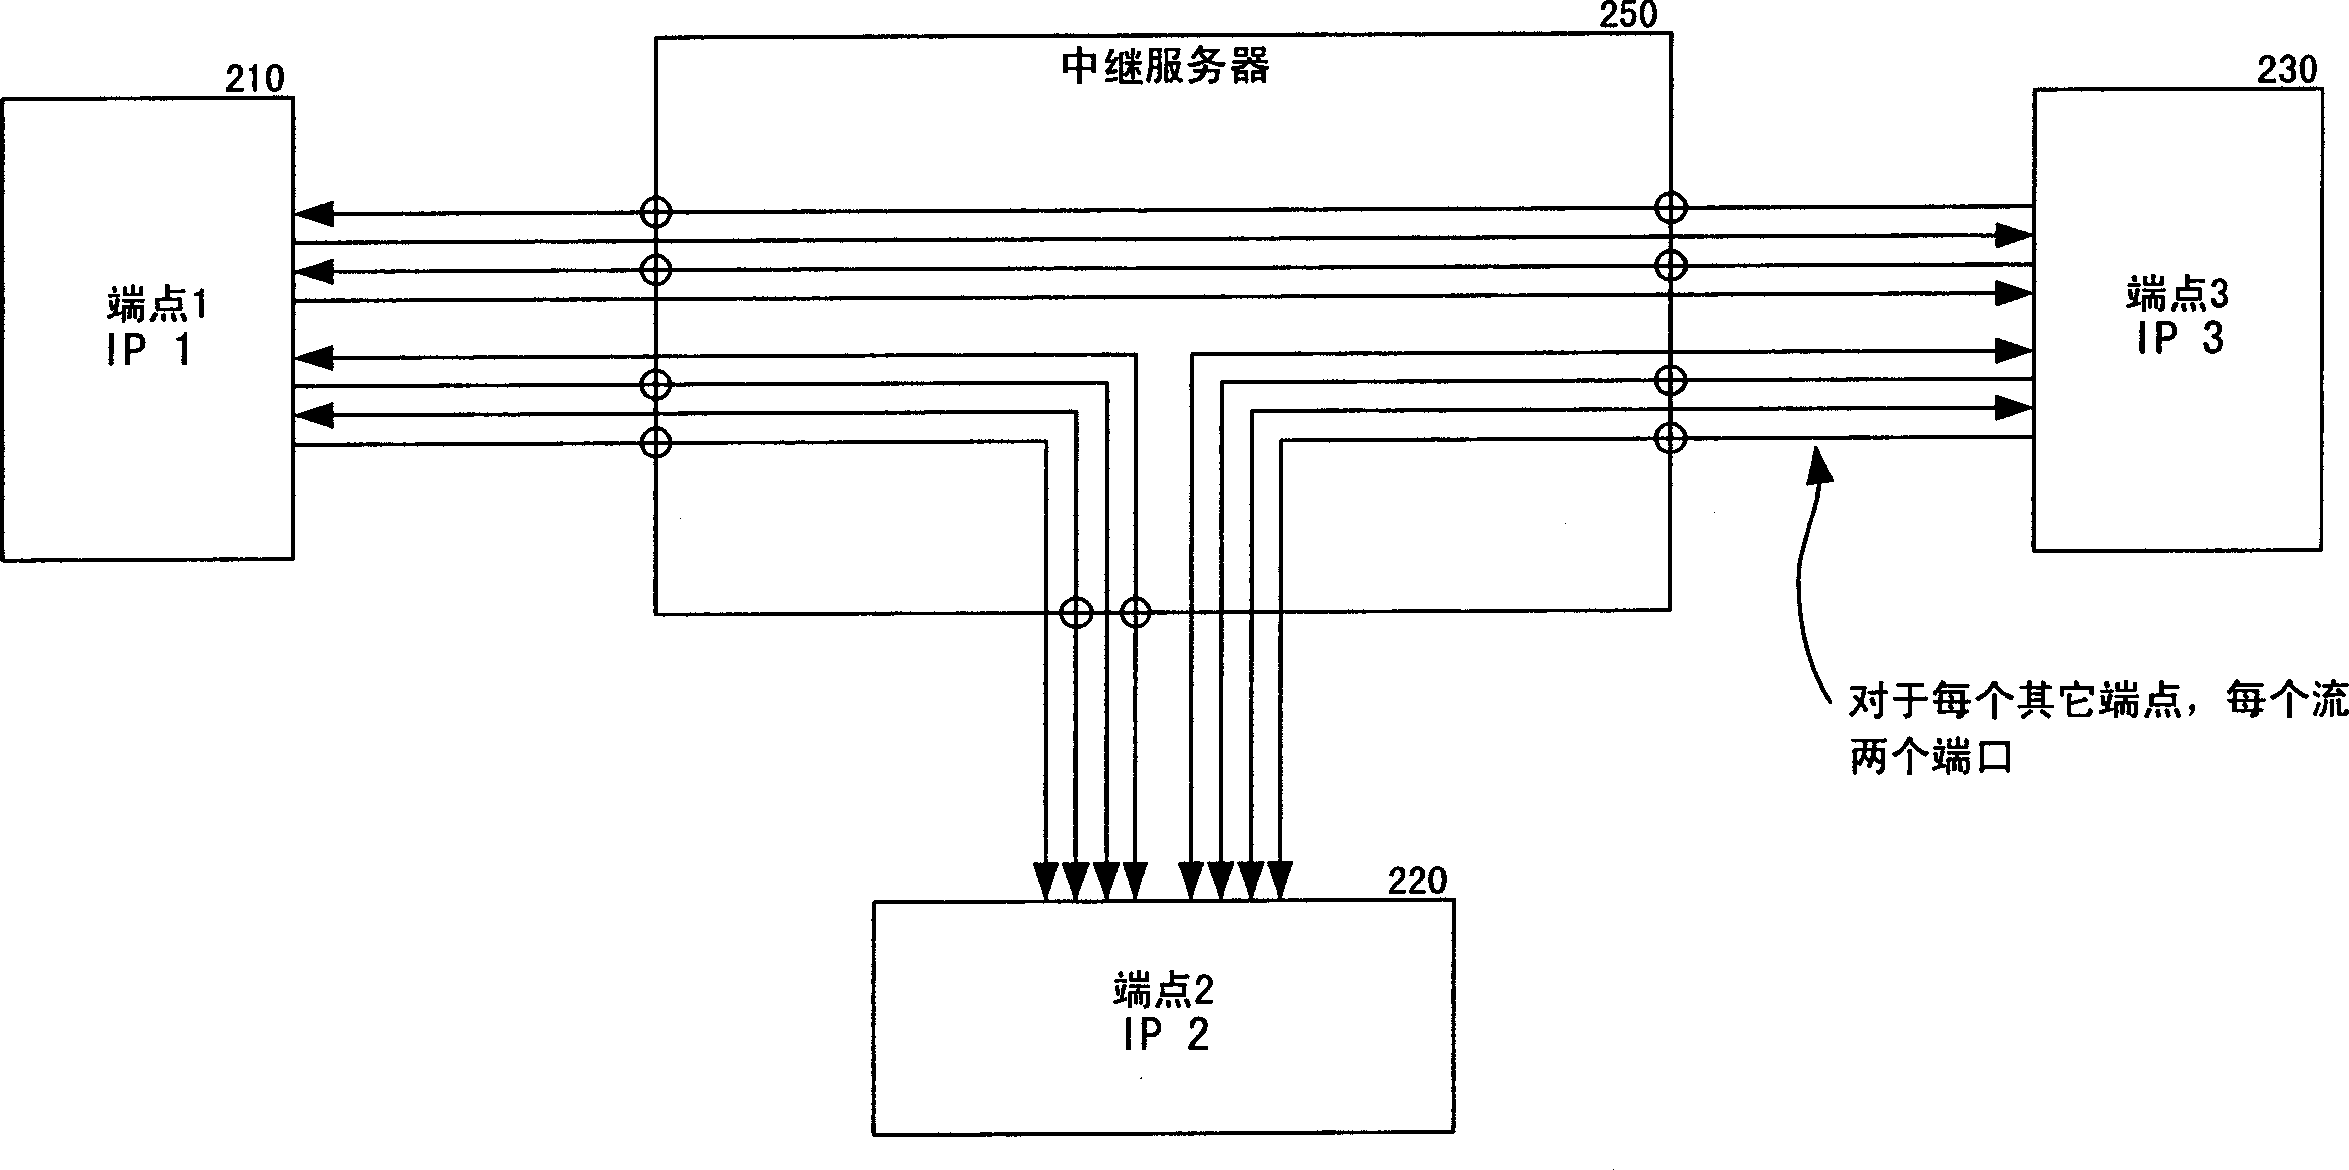 Method and system for reducing the number of ports allocated by a relay